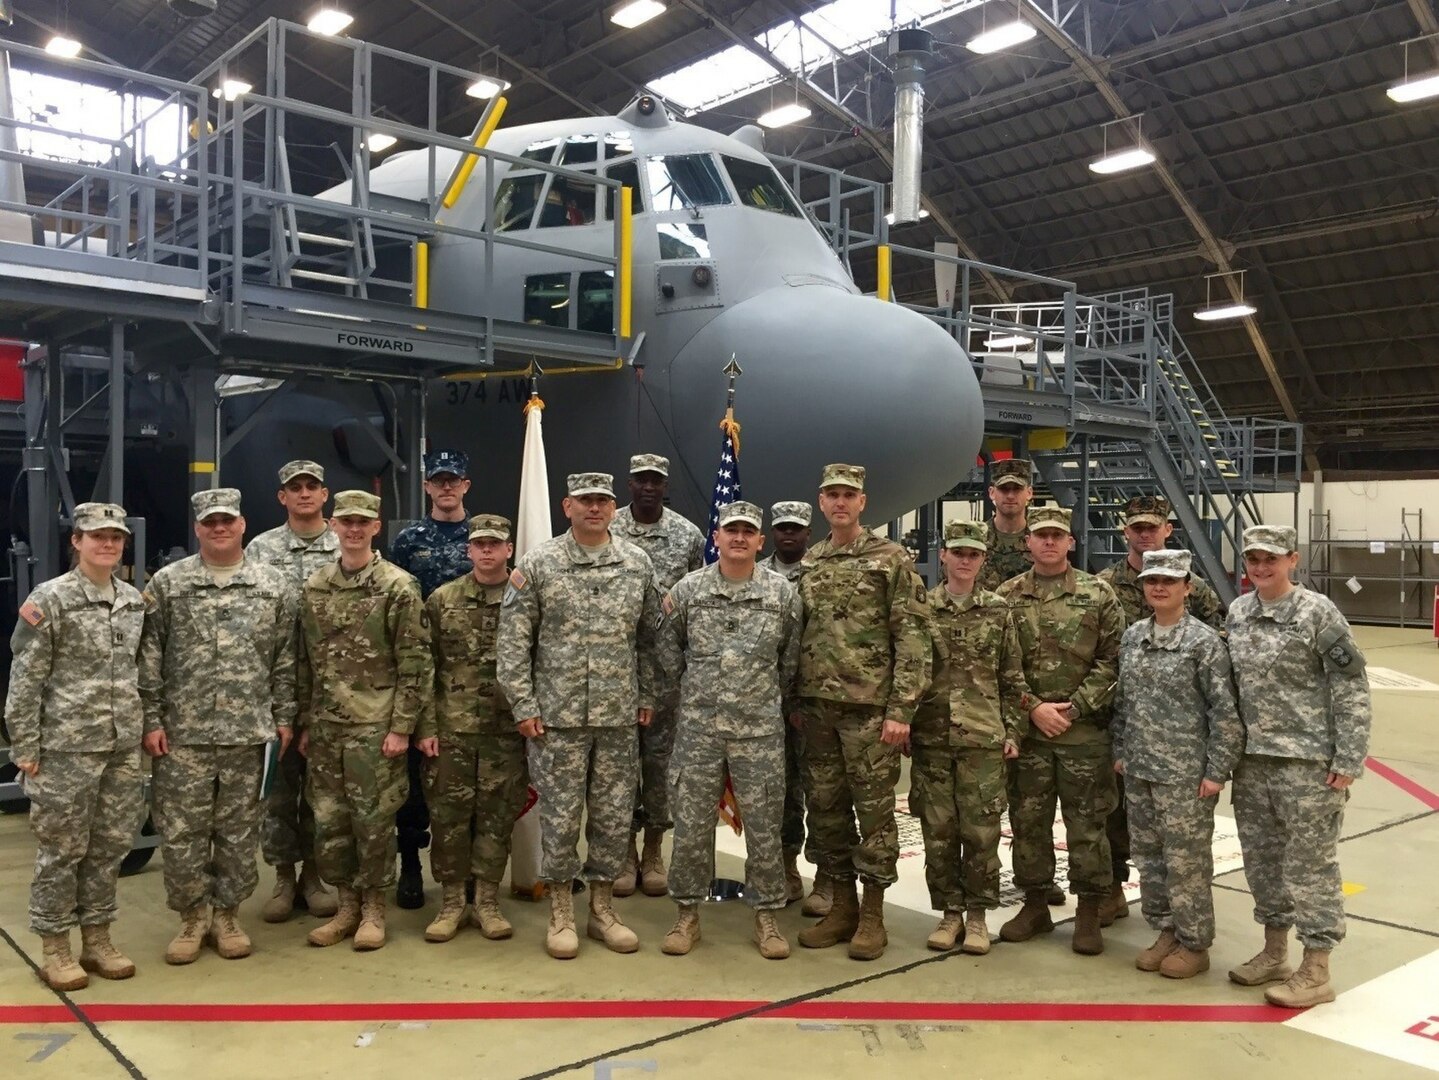 The joint forward team members for Keen Edge 16, several of which are with the 94th Army Air and Missile Defense Command, pose for a team picture, Jan. 28, 2016, inside a hangar at Yokota Airbase, Japan. Pictured in the back row from left to right are, Sgt. 1st Class Michael Jones, Lt. Kyle Wagner, Maj. Carlos Rockshead, Sgt. Andra Watson, Lt. Patrick Lauer and Gunnery Sgt. Bryan Mott. Pictured in the front row from left to right are Capt. Emily Schaefer, Staff Sgt. Ian Duffy, Maj. Matt Chambless, Staff Sgt. Randolph Scott, Master Sgt. Victor Perches, Sgt. 1st Class Missael Garcia, Col. Douglas Waddingham, Capt. Sandra Wilson, Chief Warrant Officer 2 Christopher Staffa, Maj. Shannon Aseron and Maj. Juene Rader. 